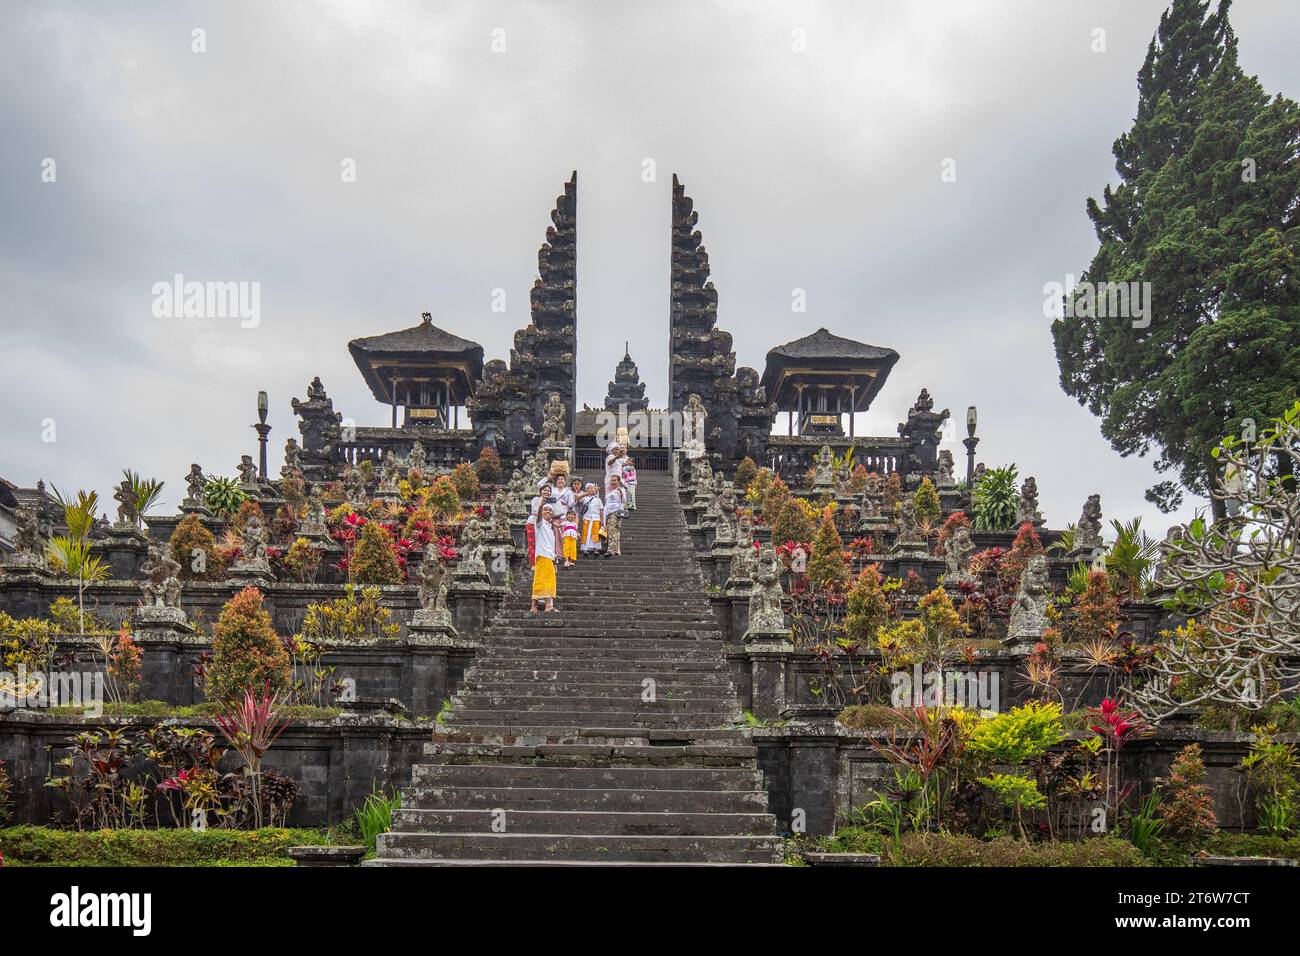 The Besakih Temple on Mount Agung Volcano. The holiest and most important temple also called the mother temple in the Hindu faith in Bali. Stock Photo